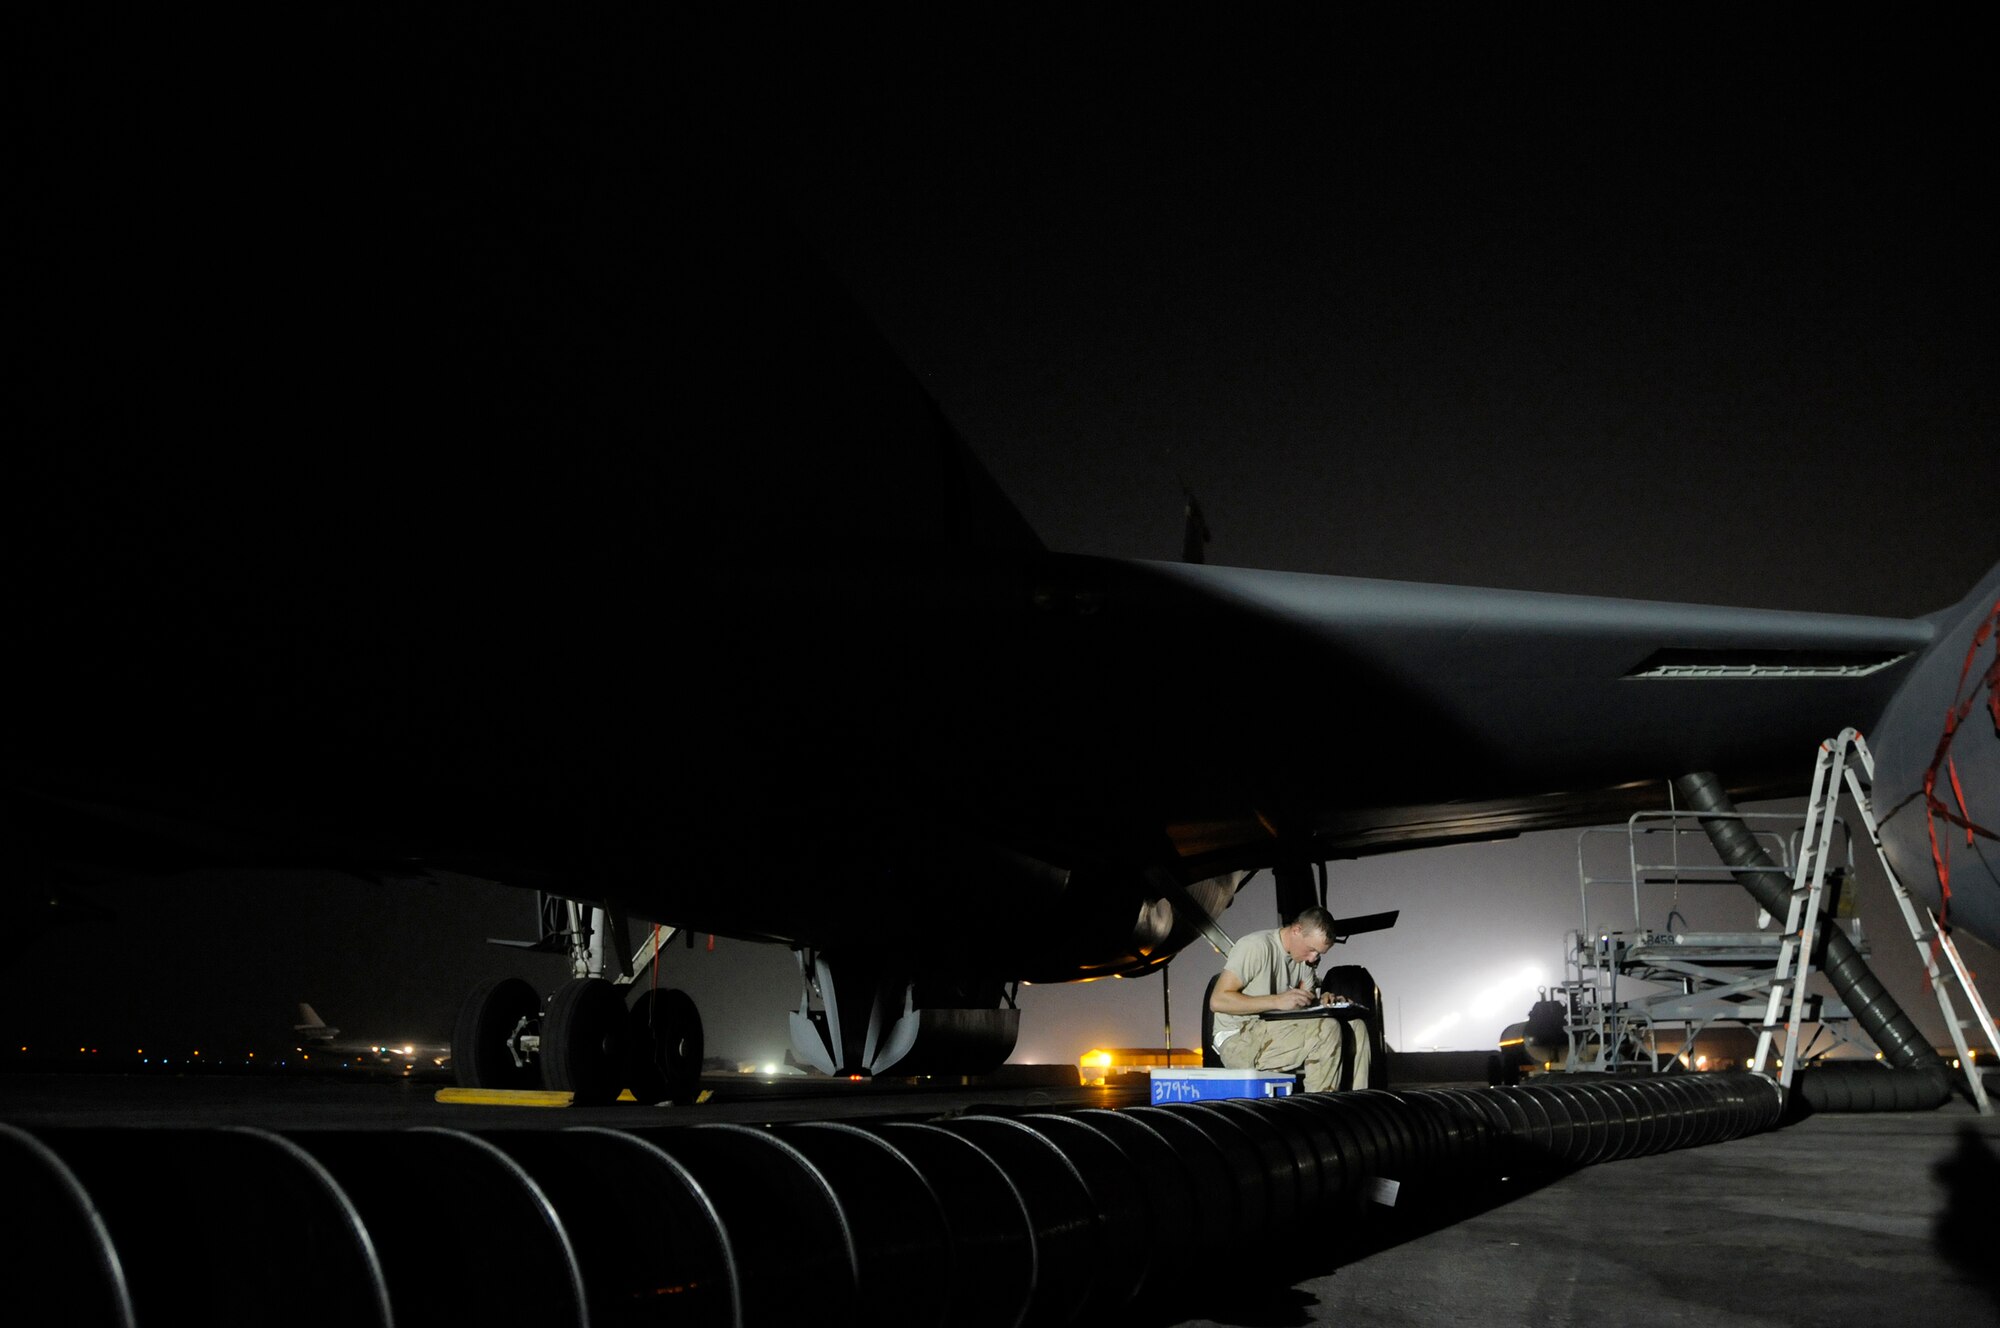 Airman 1st Class Stephen Murphy, 379th Expeditionary Aircraft Maintenance Squadron, completes a detailed maintenance log for a KC-135 Stratotanker, October 16, 2008, at an undisclosed air base in Southwest Asia.  The forms detail each part taken from or added to the aircraft and all other maintenance procedures performed on the Stratotanker.  A three-man crew is replacing a compensator probe on the Stratotanker's main fuel tank at an undisclosed air base in Southwest Asia.  The KC-135 provides the core aerial refueling capability for the United States Air Force and provides aerial refueling support to Navy, Marine Corps and allied nation aircraft.  Airman Murphy, a native of Cresco, Iowa, is deployed from Grand Forks Air Force Base, N.D., in support of Operations Iraqi and Enduring Freedom and Joint Task Force-Horn of Africa.  (U.S. Air Force photo by Tech. Sgt. Michael Boquette/Released)